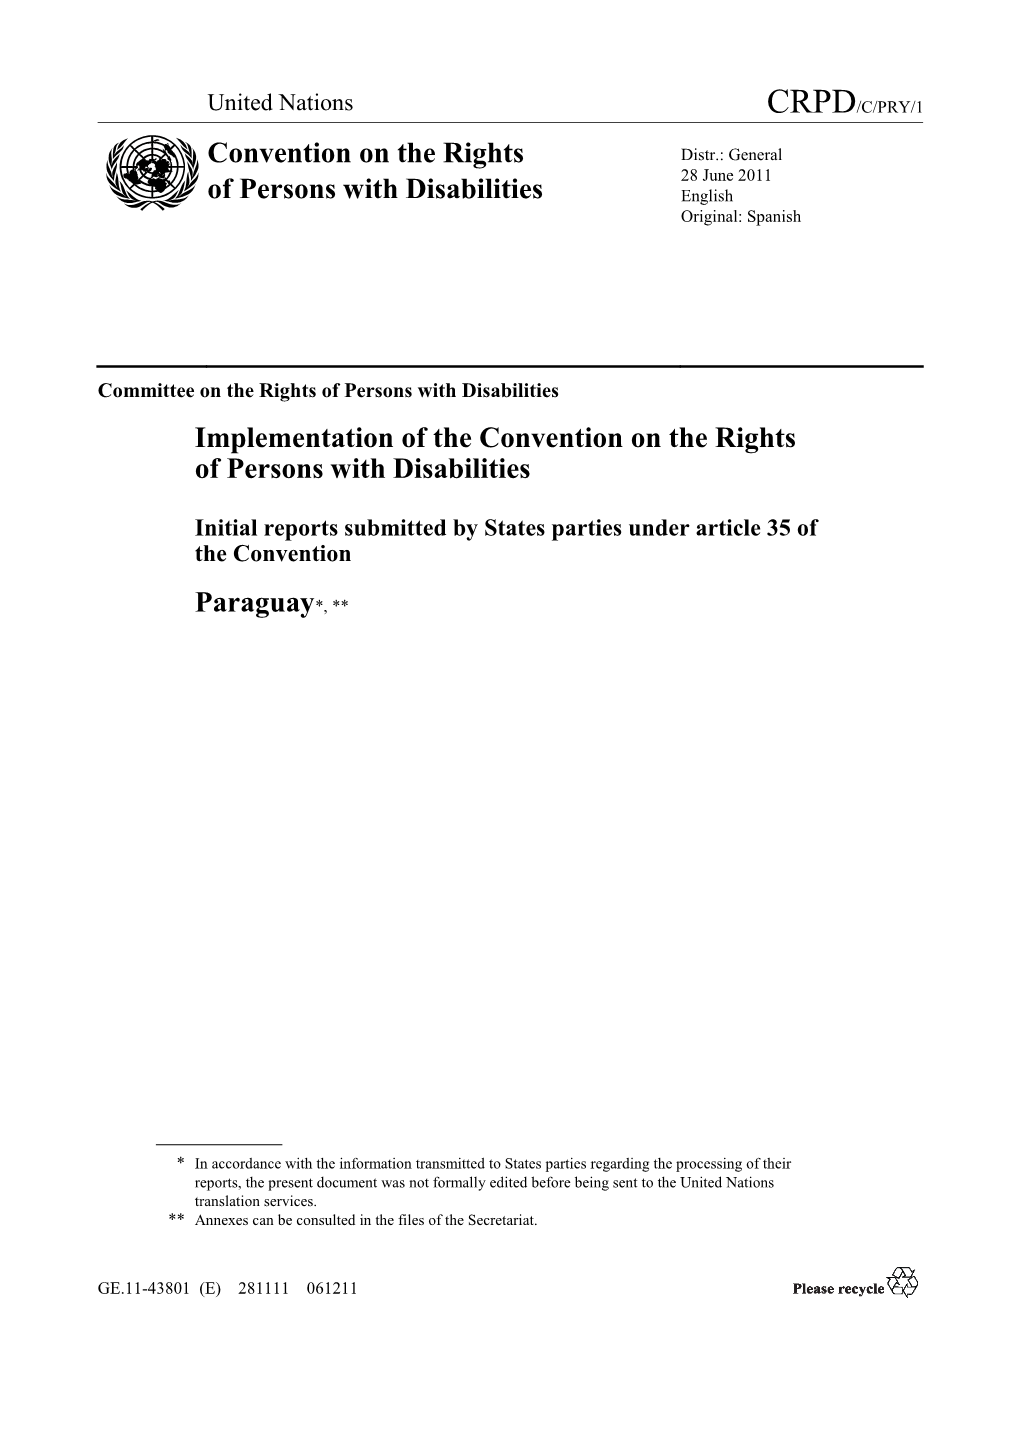 Implementation of the Convention on the Rights of Persons with Disabilities